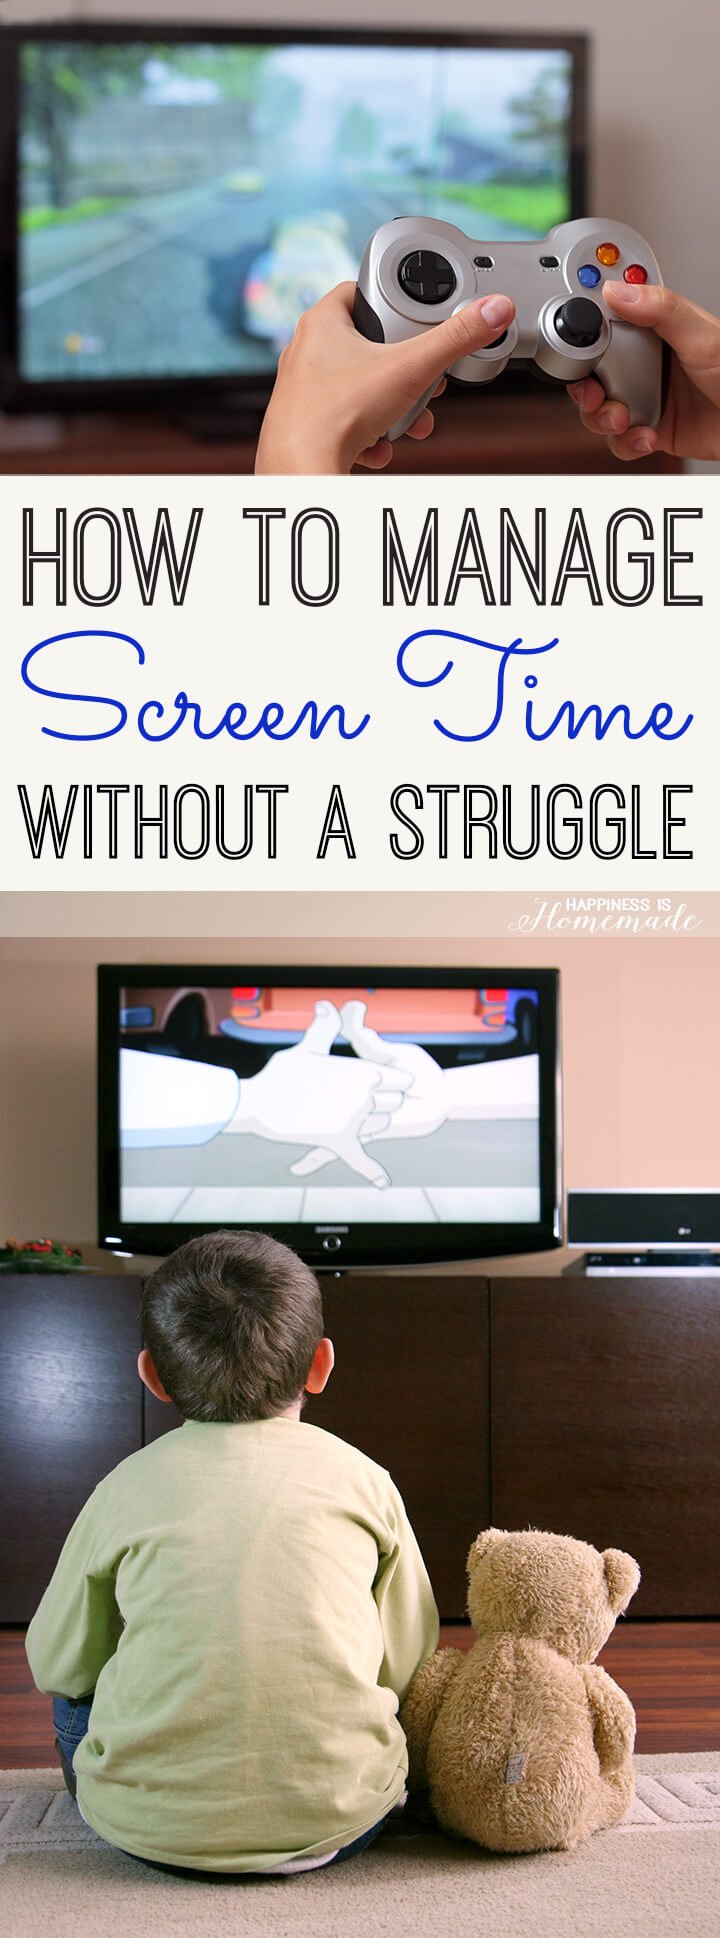 How to Manage Your Child’s Screen Time